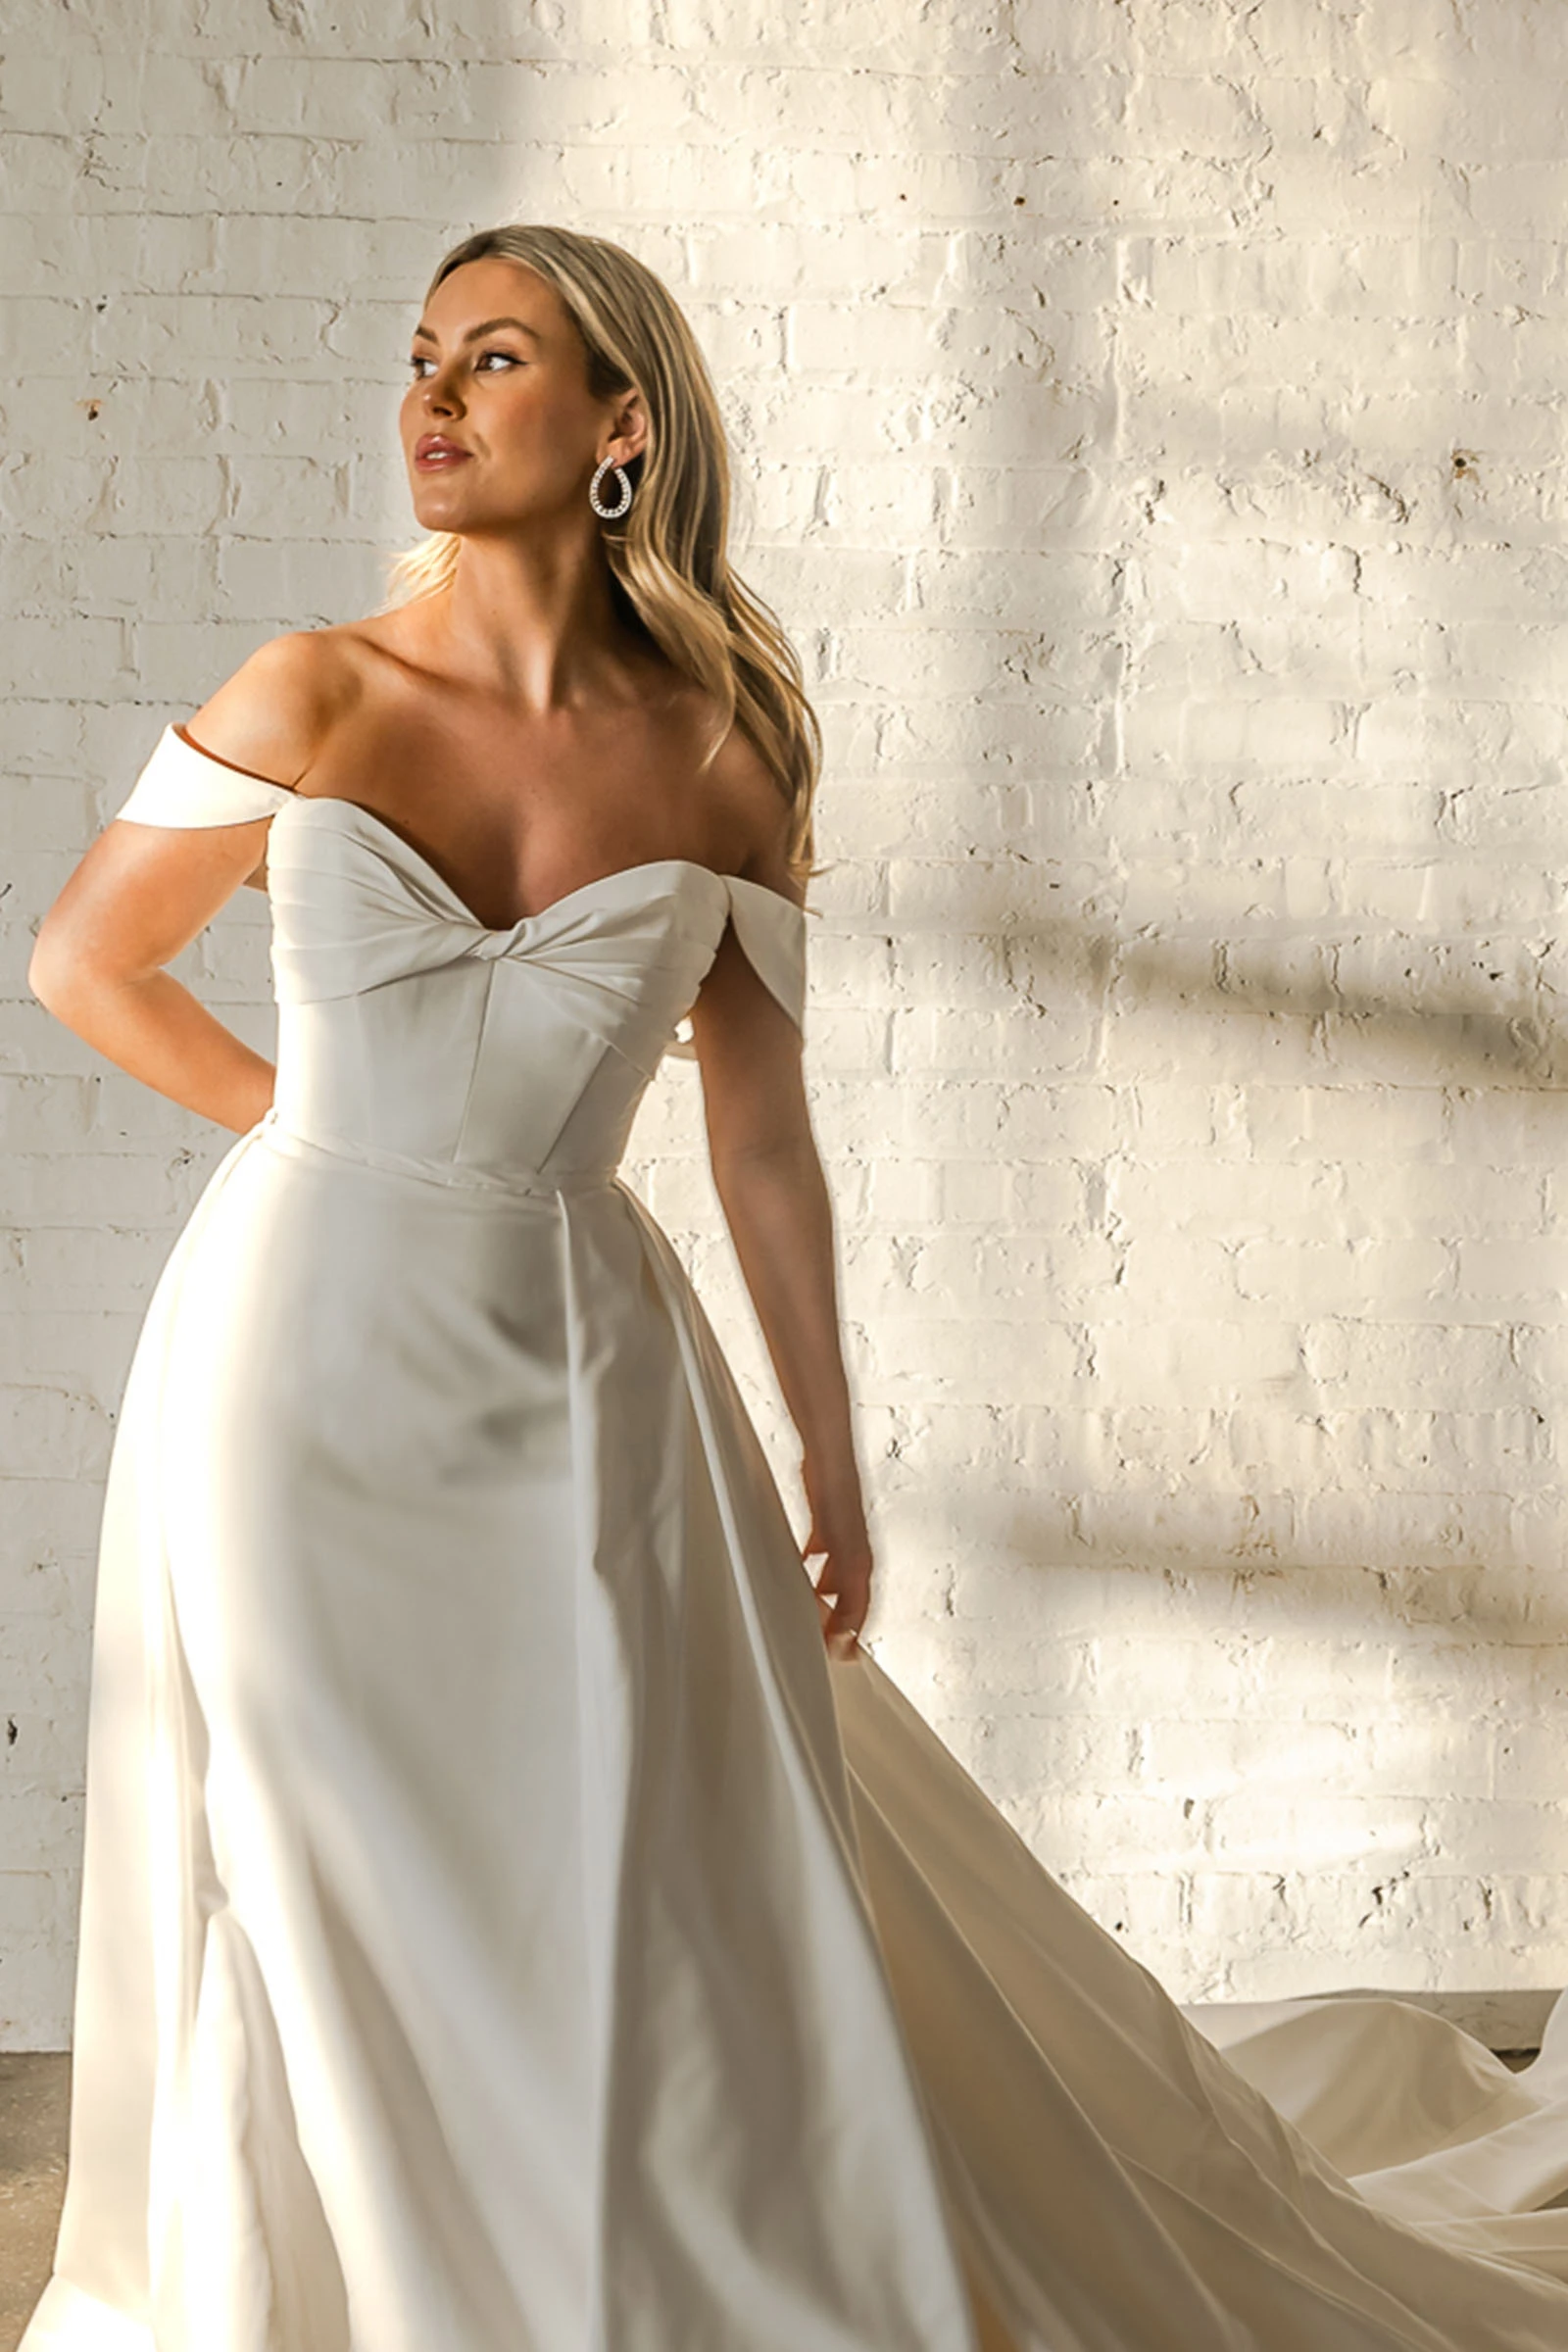 simple a-line wedding dress with detachable overskirt - D3755 by Essense of Australia